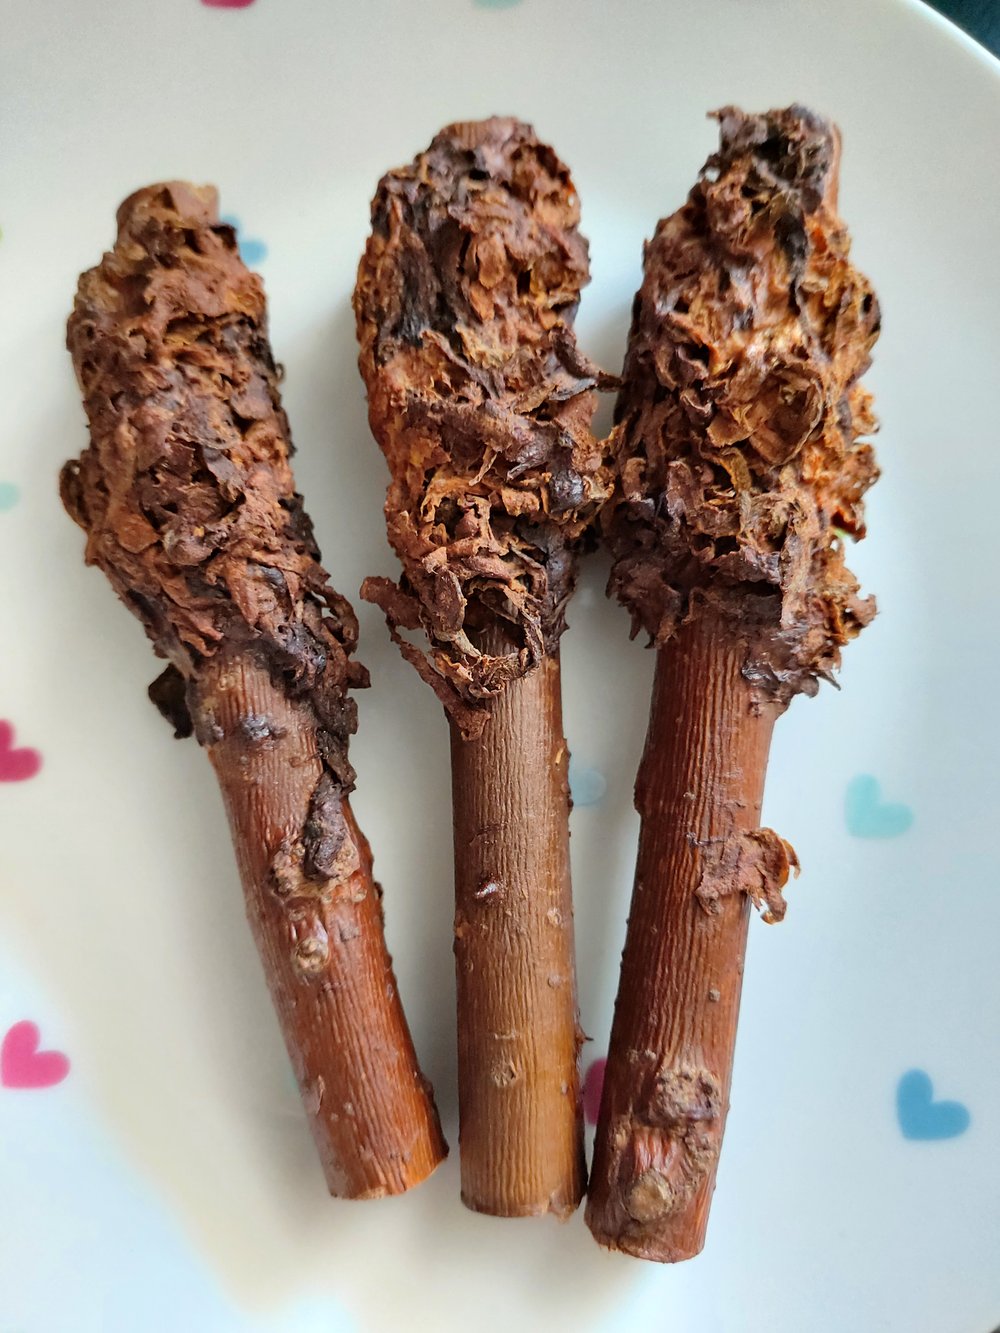 Image of Banana and carrot baked willow branch pieces